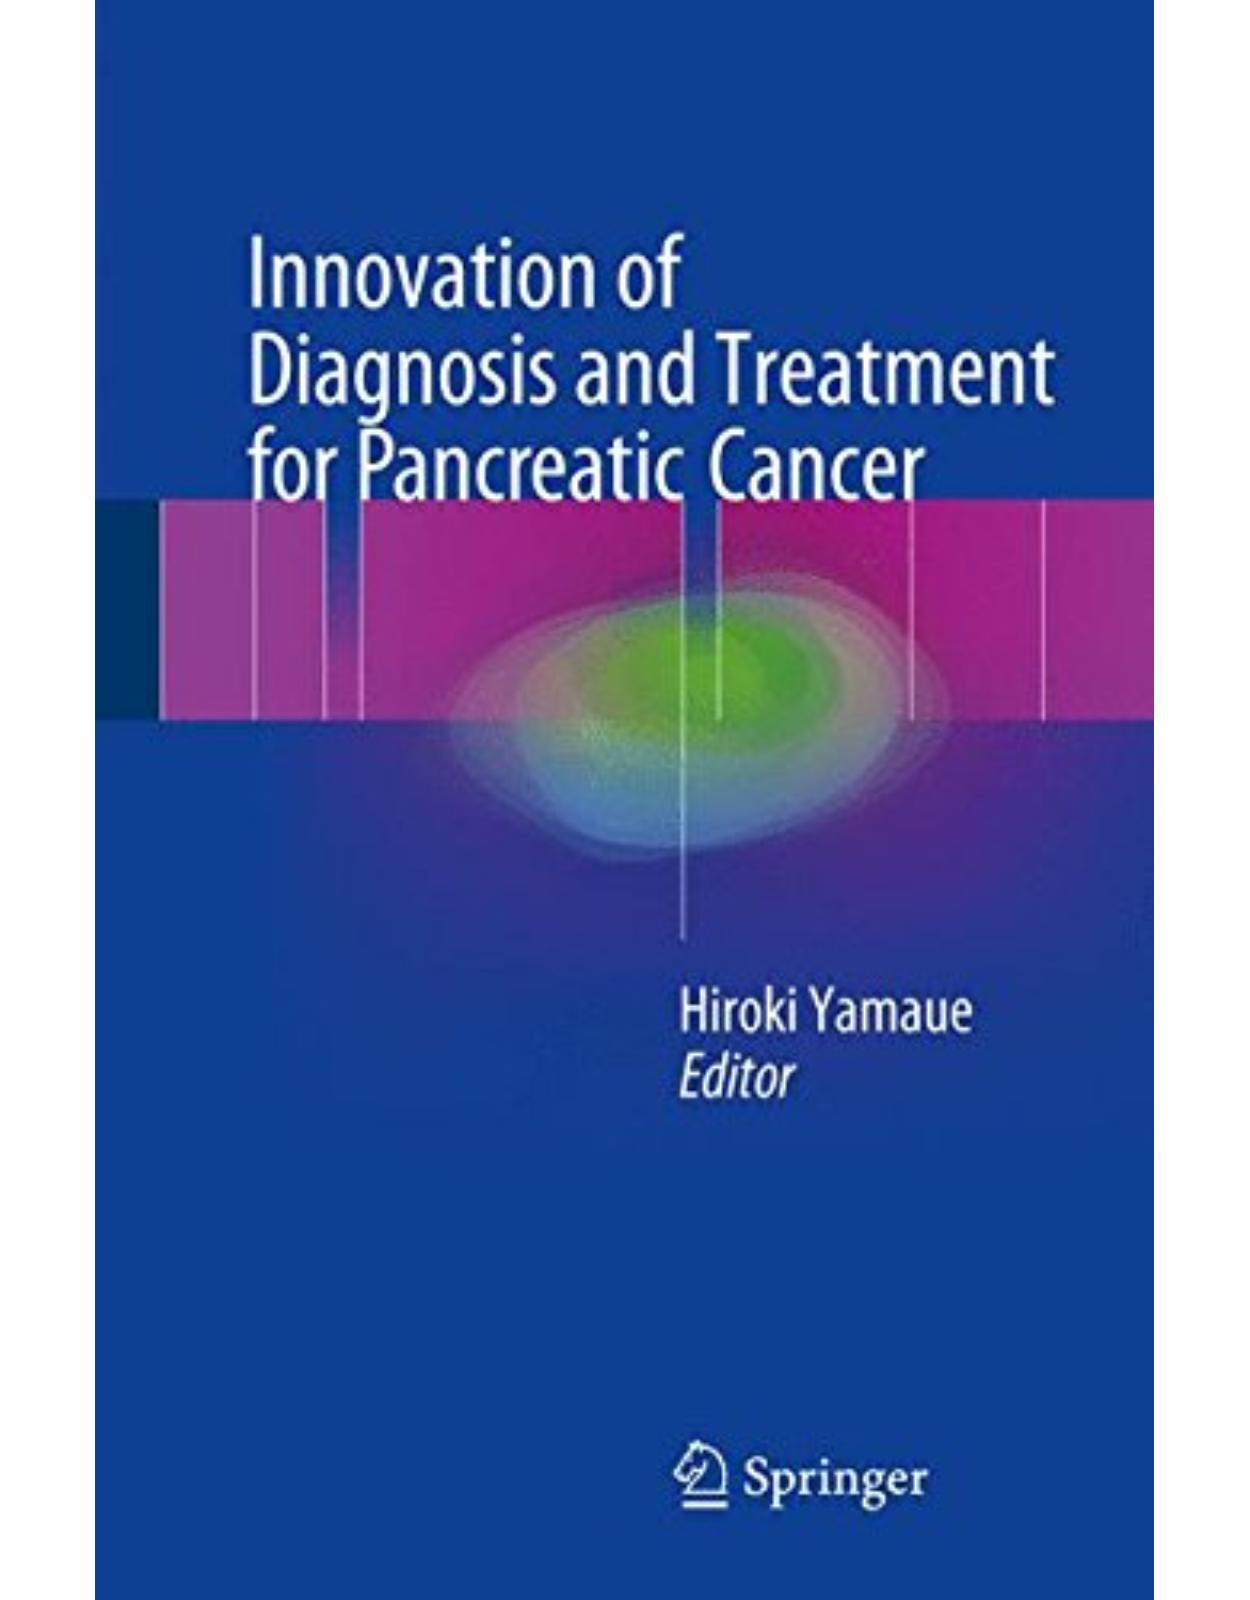 Innovation of Diagnosis and Treatment for Pancreatic Cancer